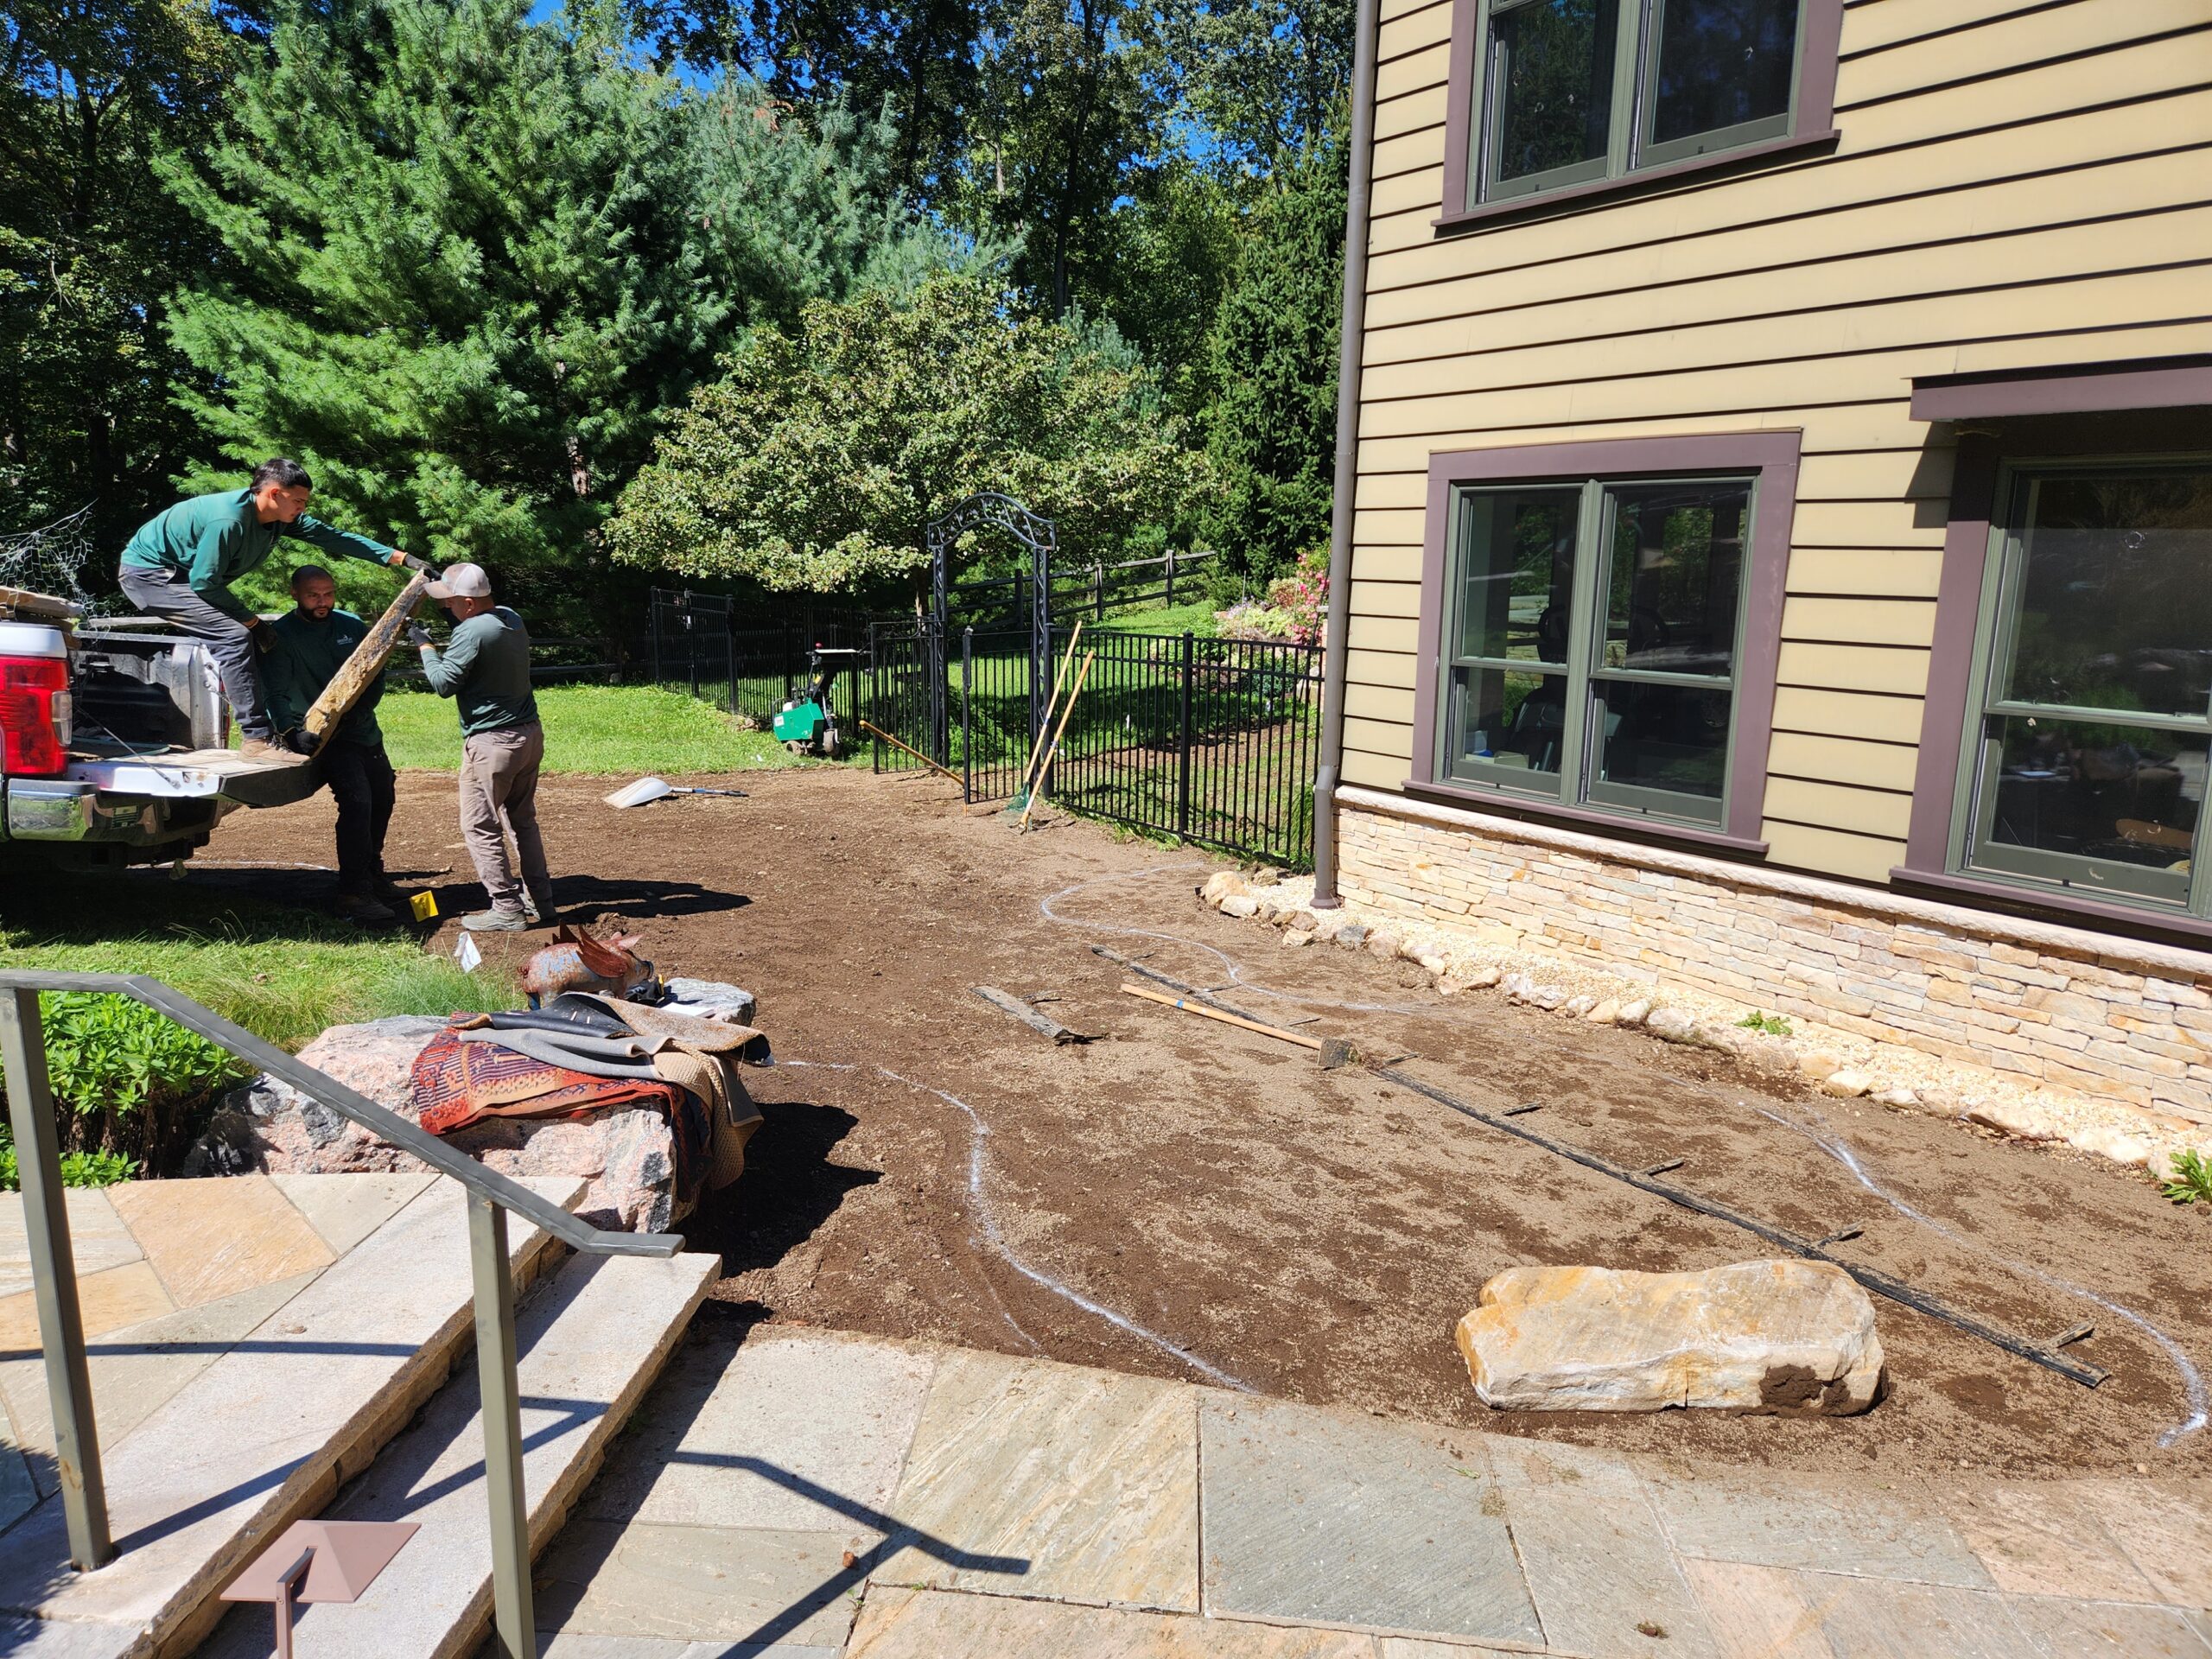 Removing turf from the adjacent area to expand the Zen Garden.